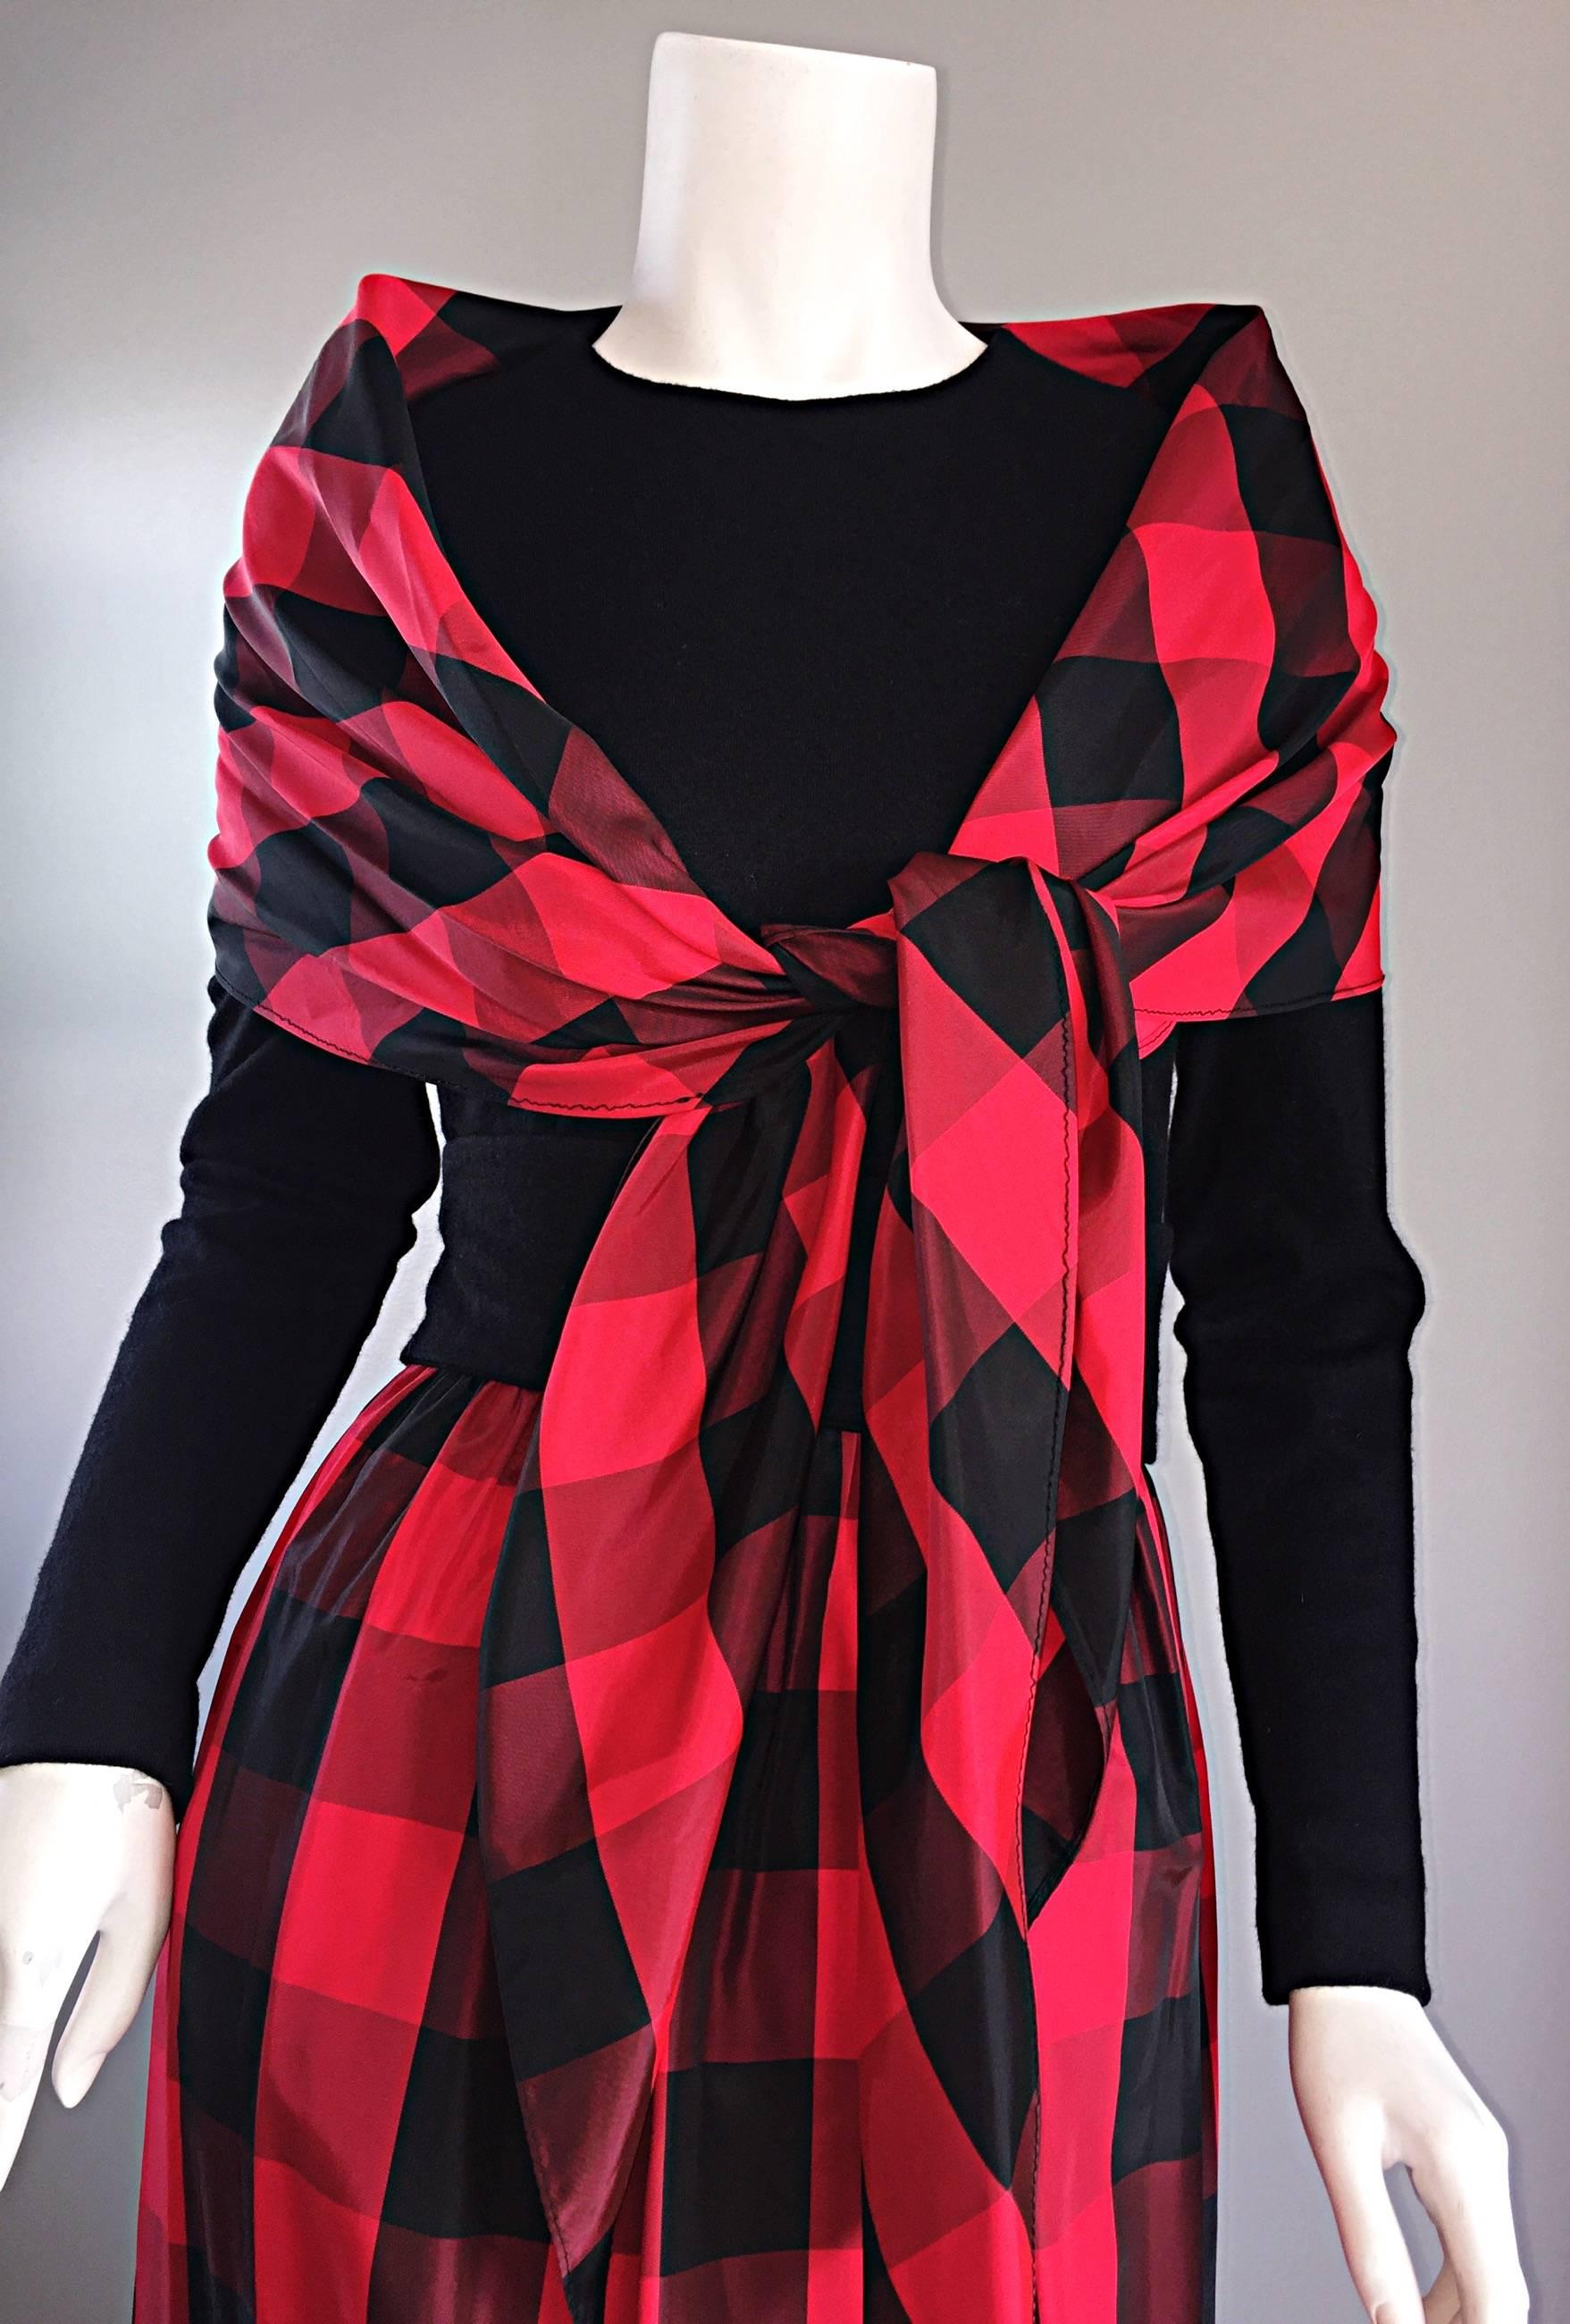 Chic Vintage Anne Fogarty 1970s Black and Red Checkered Dress and Shawl Set 70s In Excellent Condition For Sale In San Diego, CA